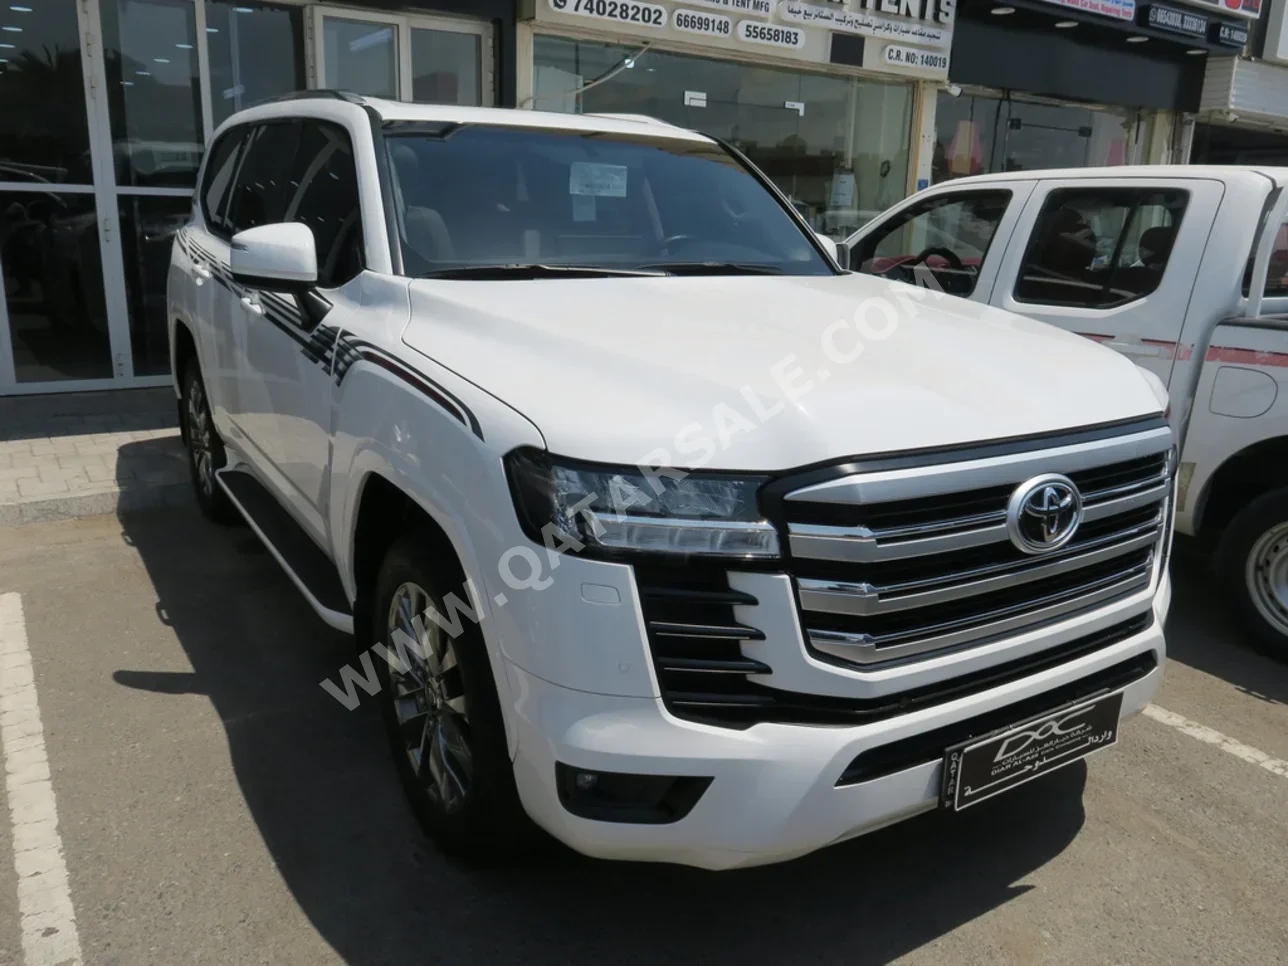 Toyota  Land Cruiser  GXR Twin Turbo  2022  Automatic  58,000 Km  6 Cylinder  Four Wheel Drive (4WD)  SUV  White  With Warranty